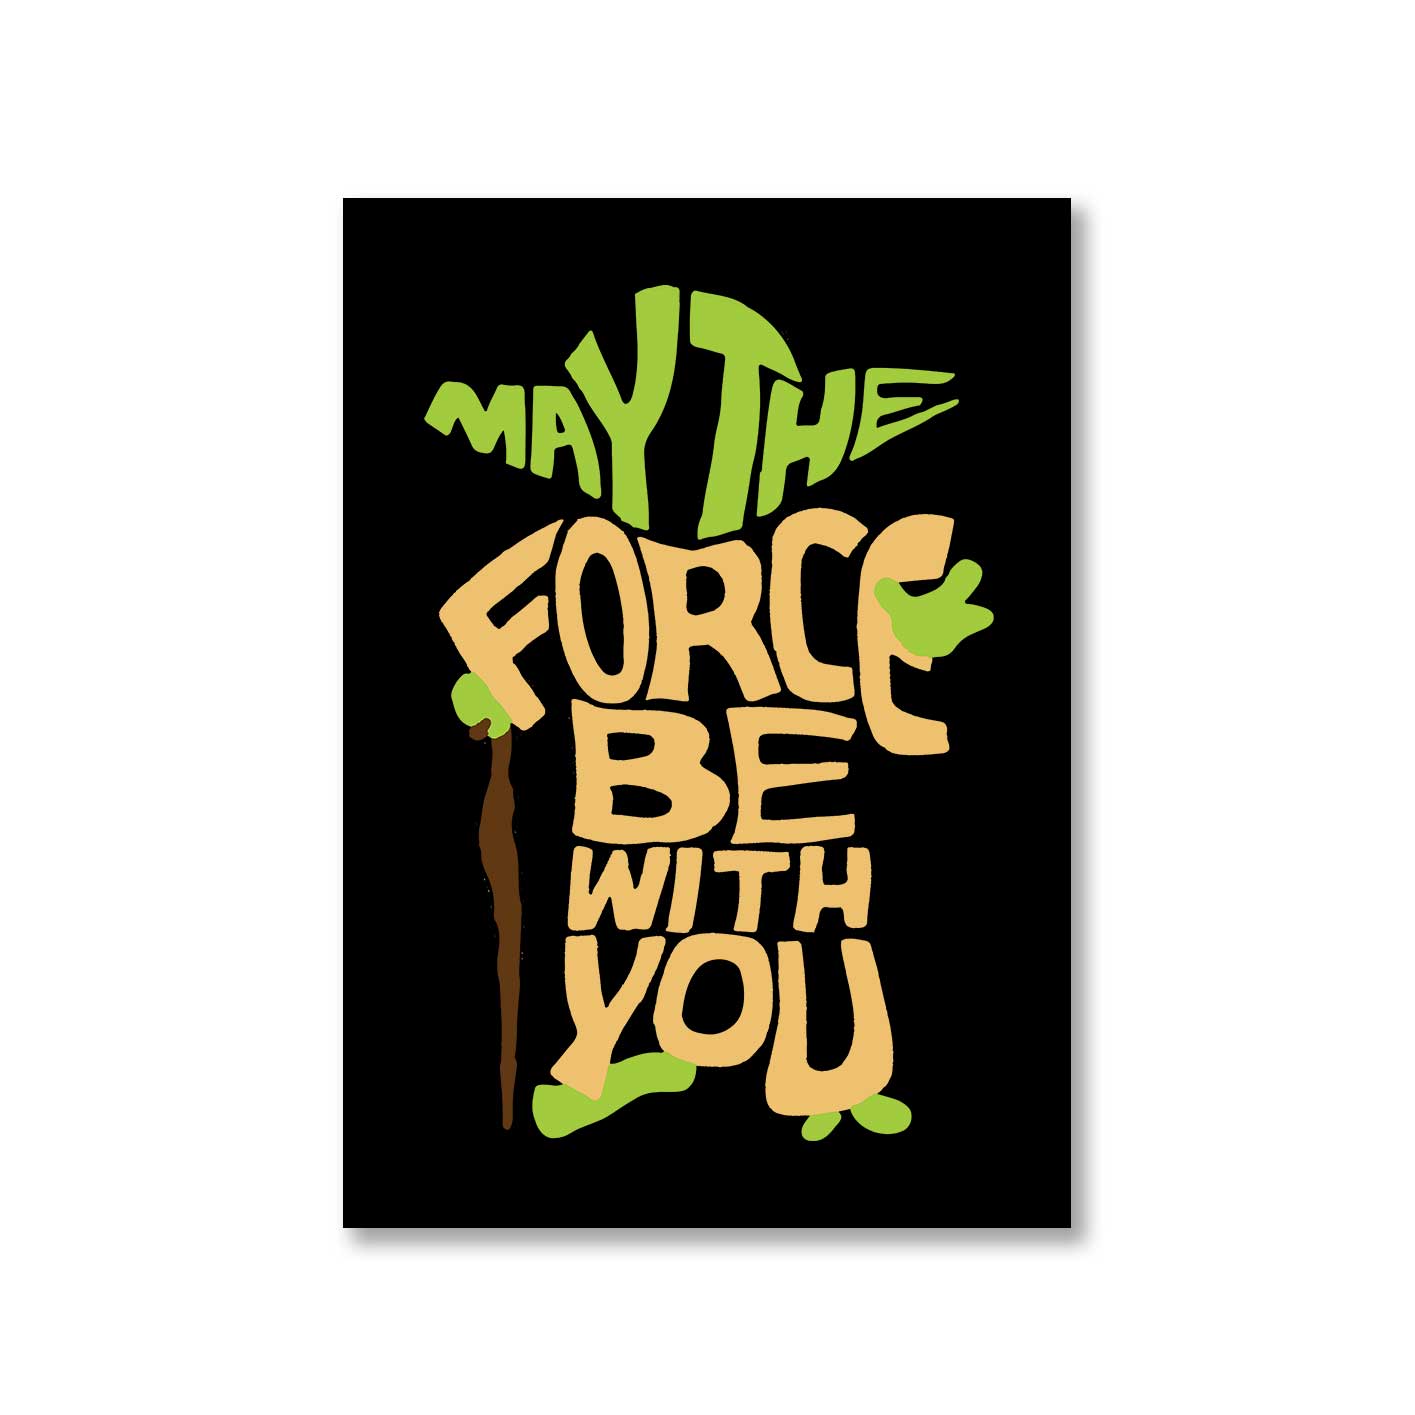 star wars may the force be with you poster wall art buy online united states of america usa the banyan tee tbt a4 yoda